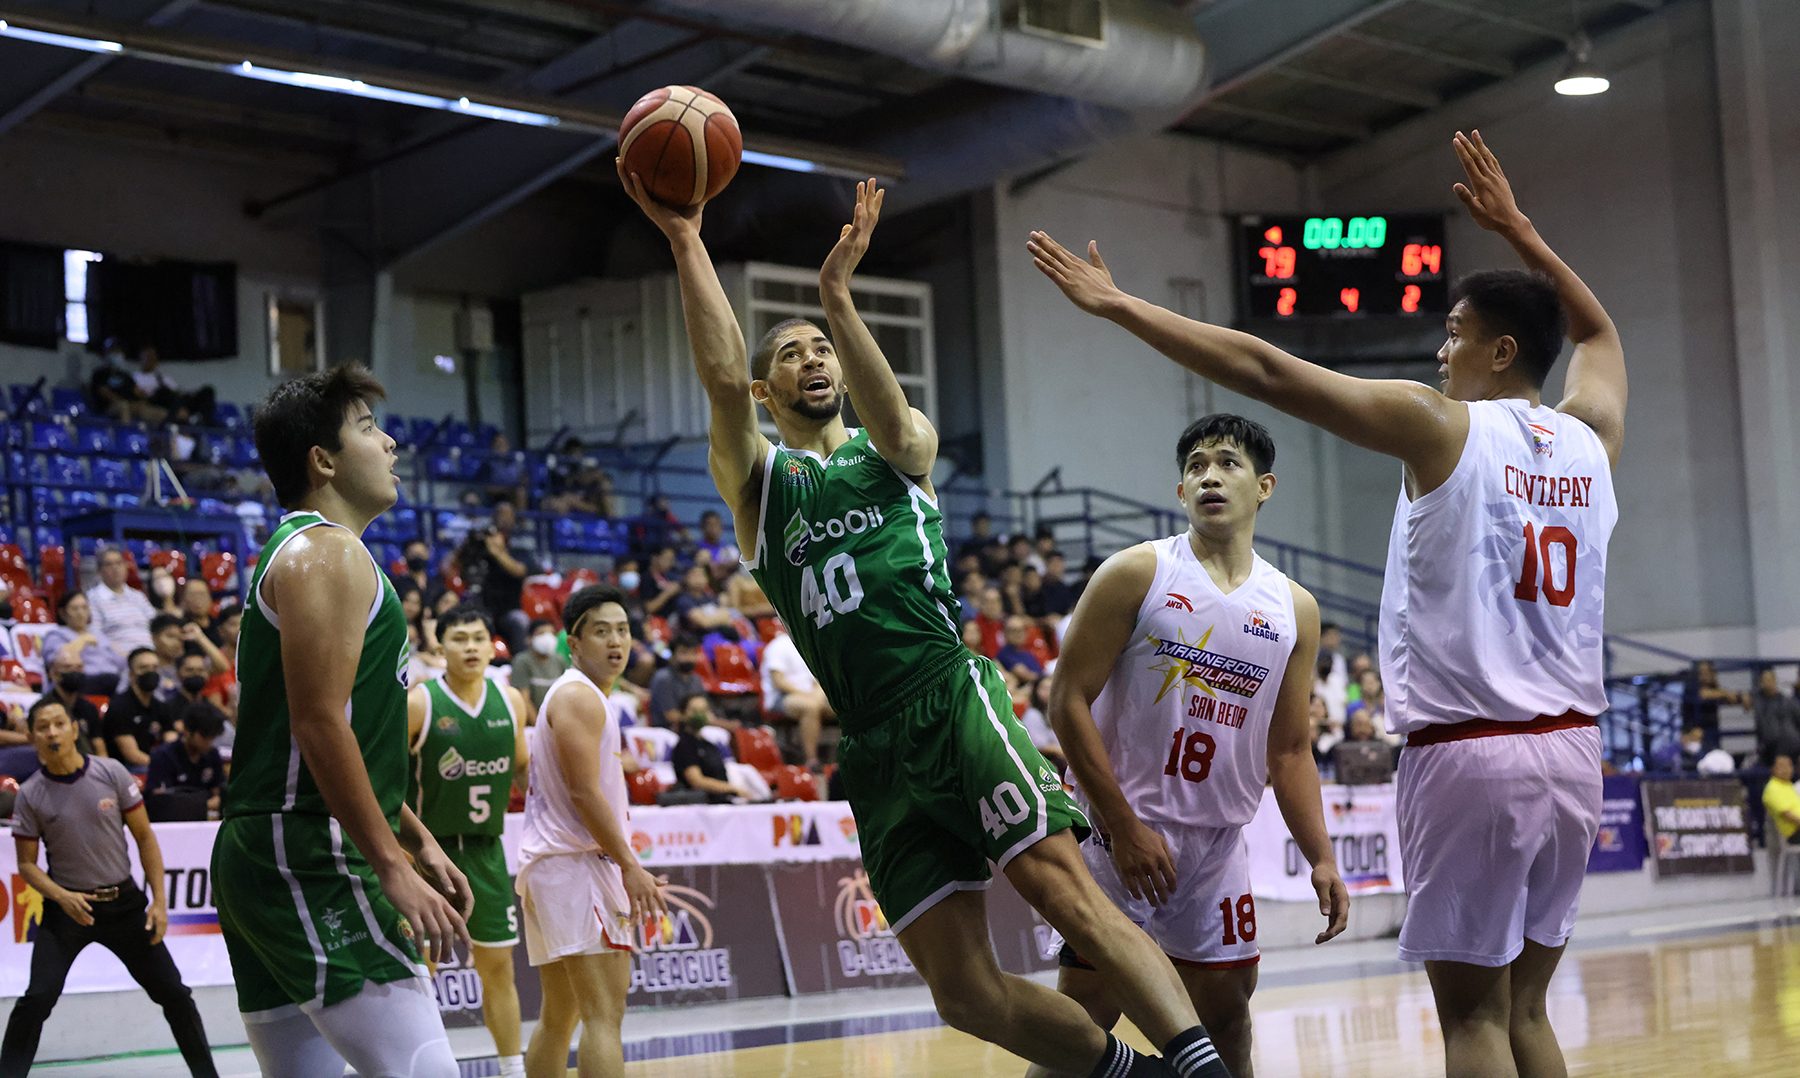 La Salle nears 2nd straight PBA D-League title with 26-point rout of San Beda